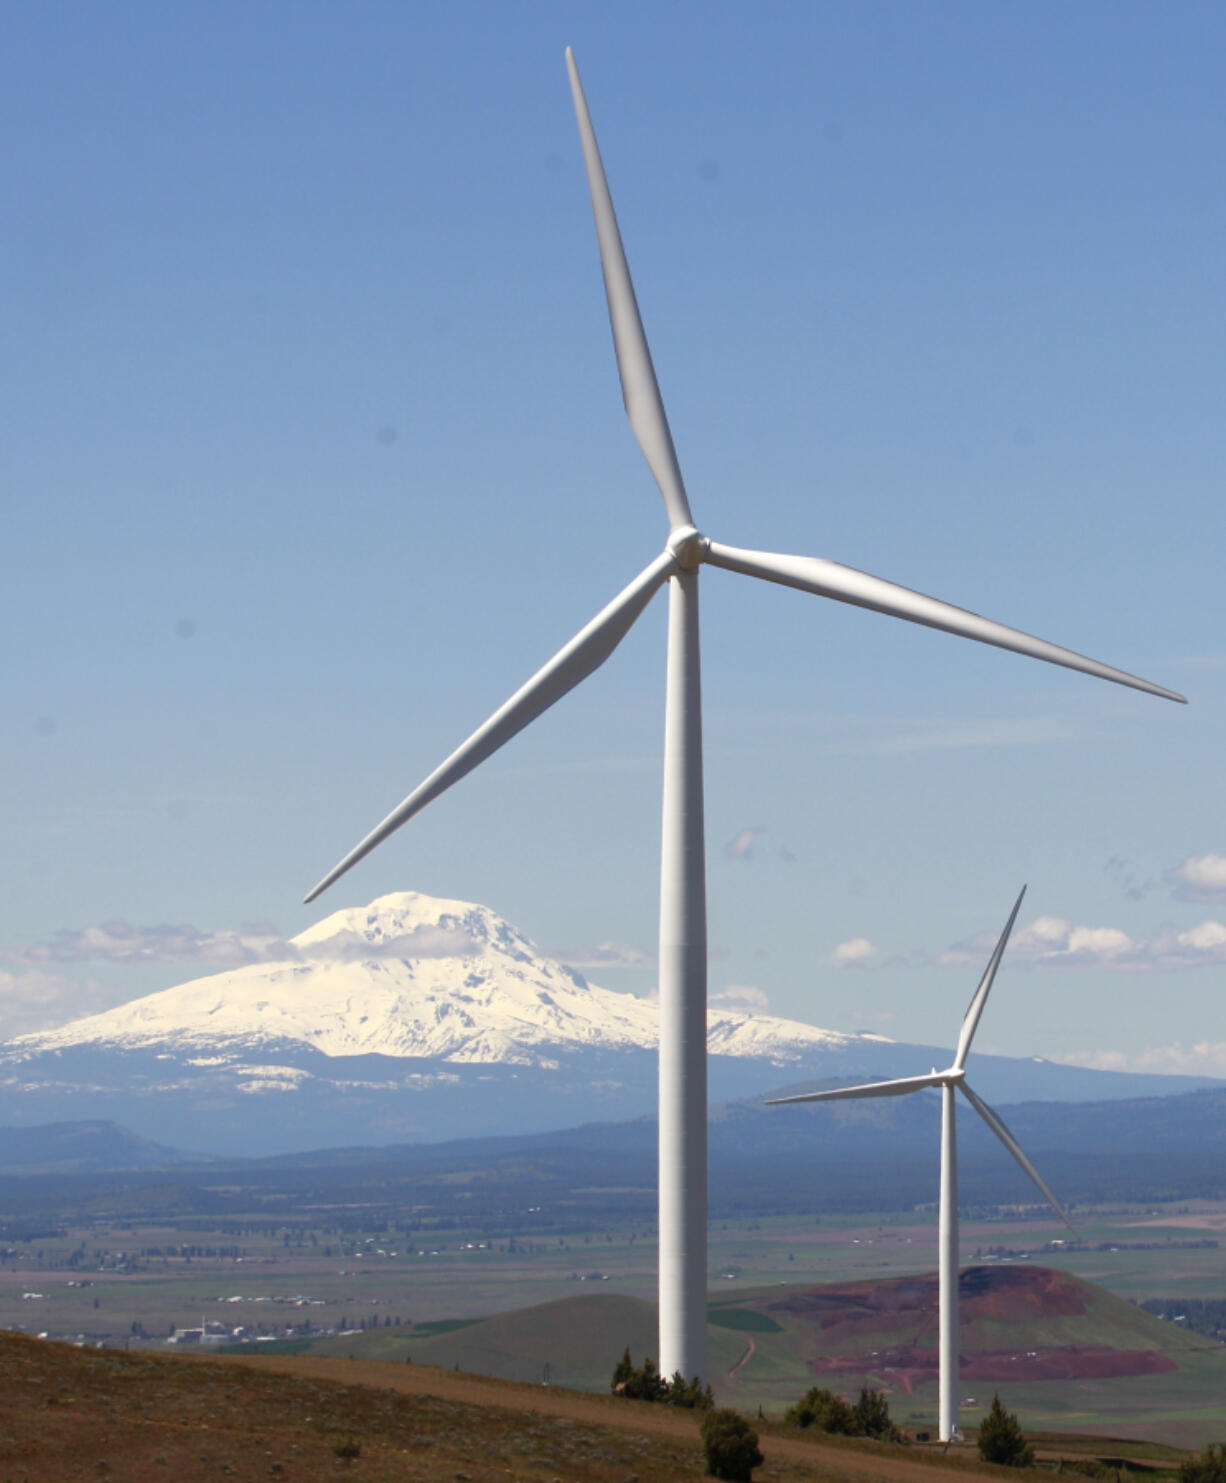 FILE - This June 3, 2011, file photo, shows wind turbines on the Columbia Gorge near Goldendale, Wash. Federal regulators ruled on Wednesday, Dec. 7, 2011, in favor of Northwest wind-power generators who objected to being ordered to shut down at nights and on weekends this spring when the Columbia River basin was brimming with water and federal hydropower dams were running flat out.